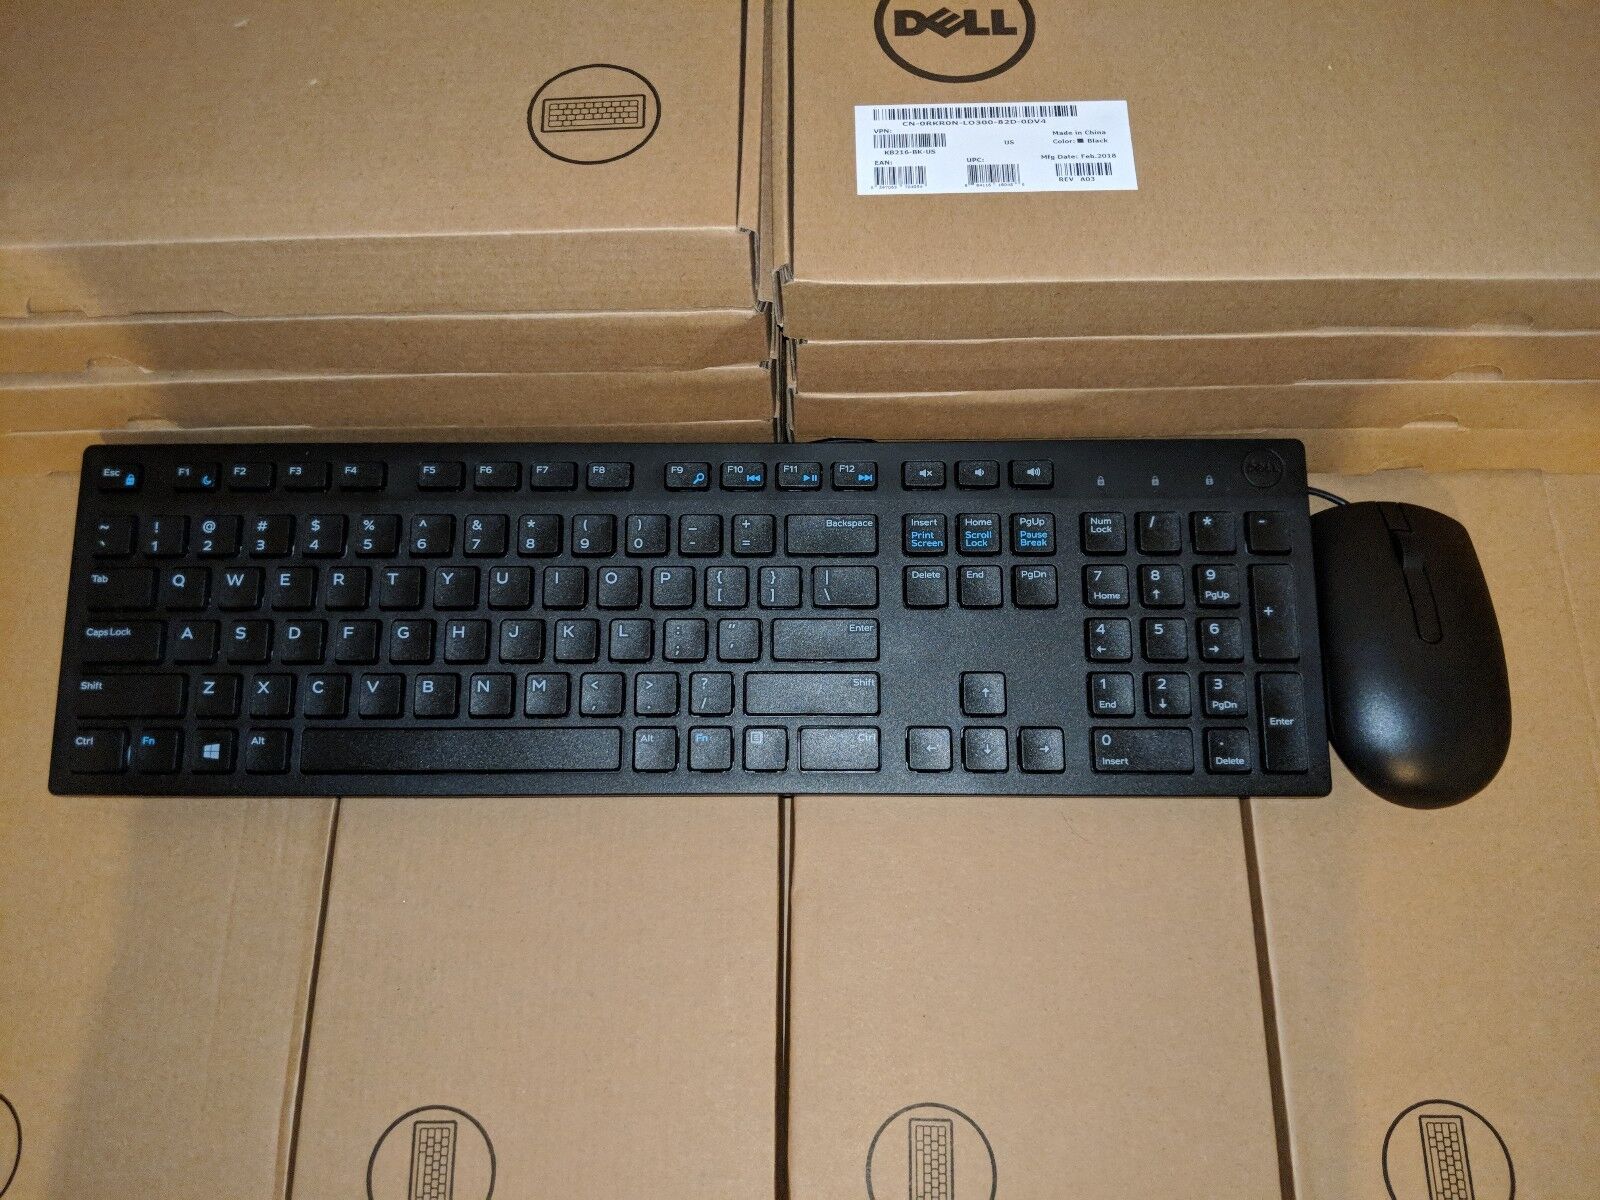 Dell Keyboard KB216 with Dell Mouse MS116 Lot of 10 Sets *New In Box* Dell Does Not Apply